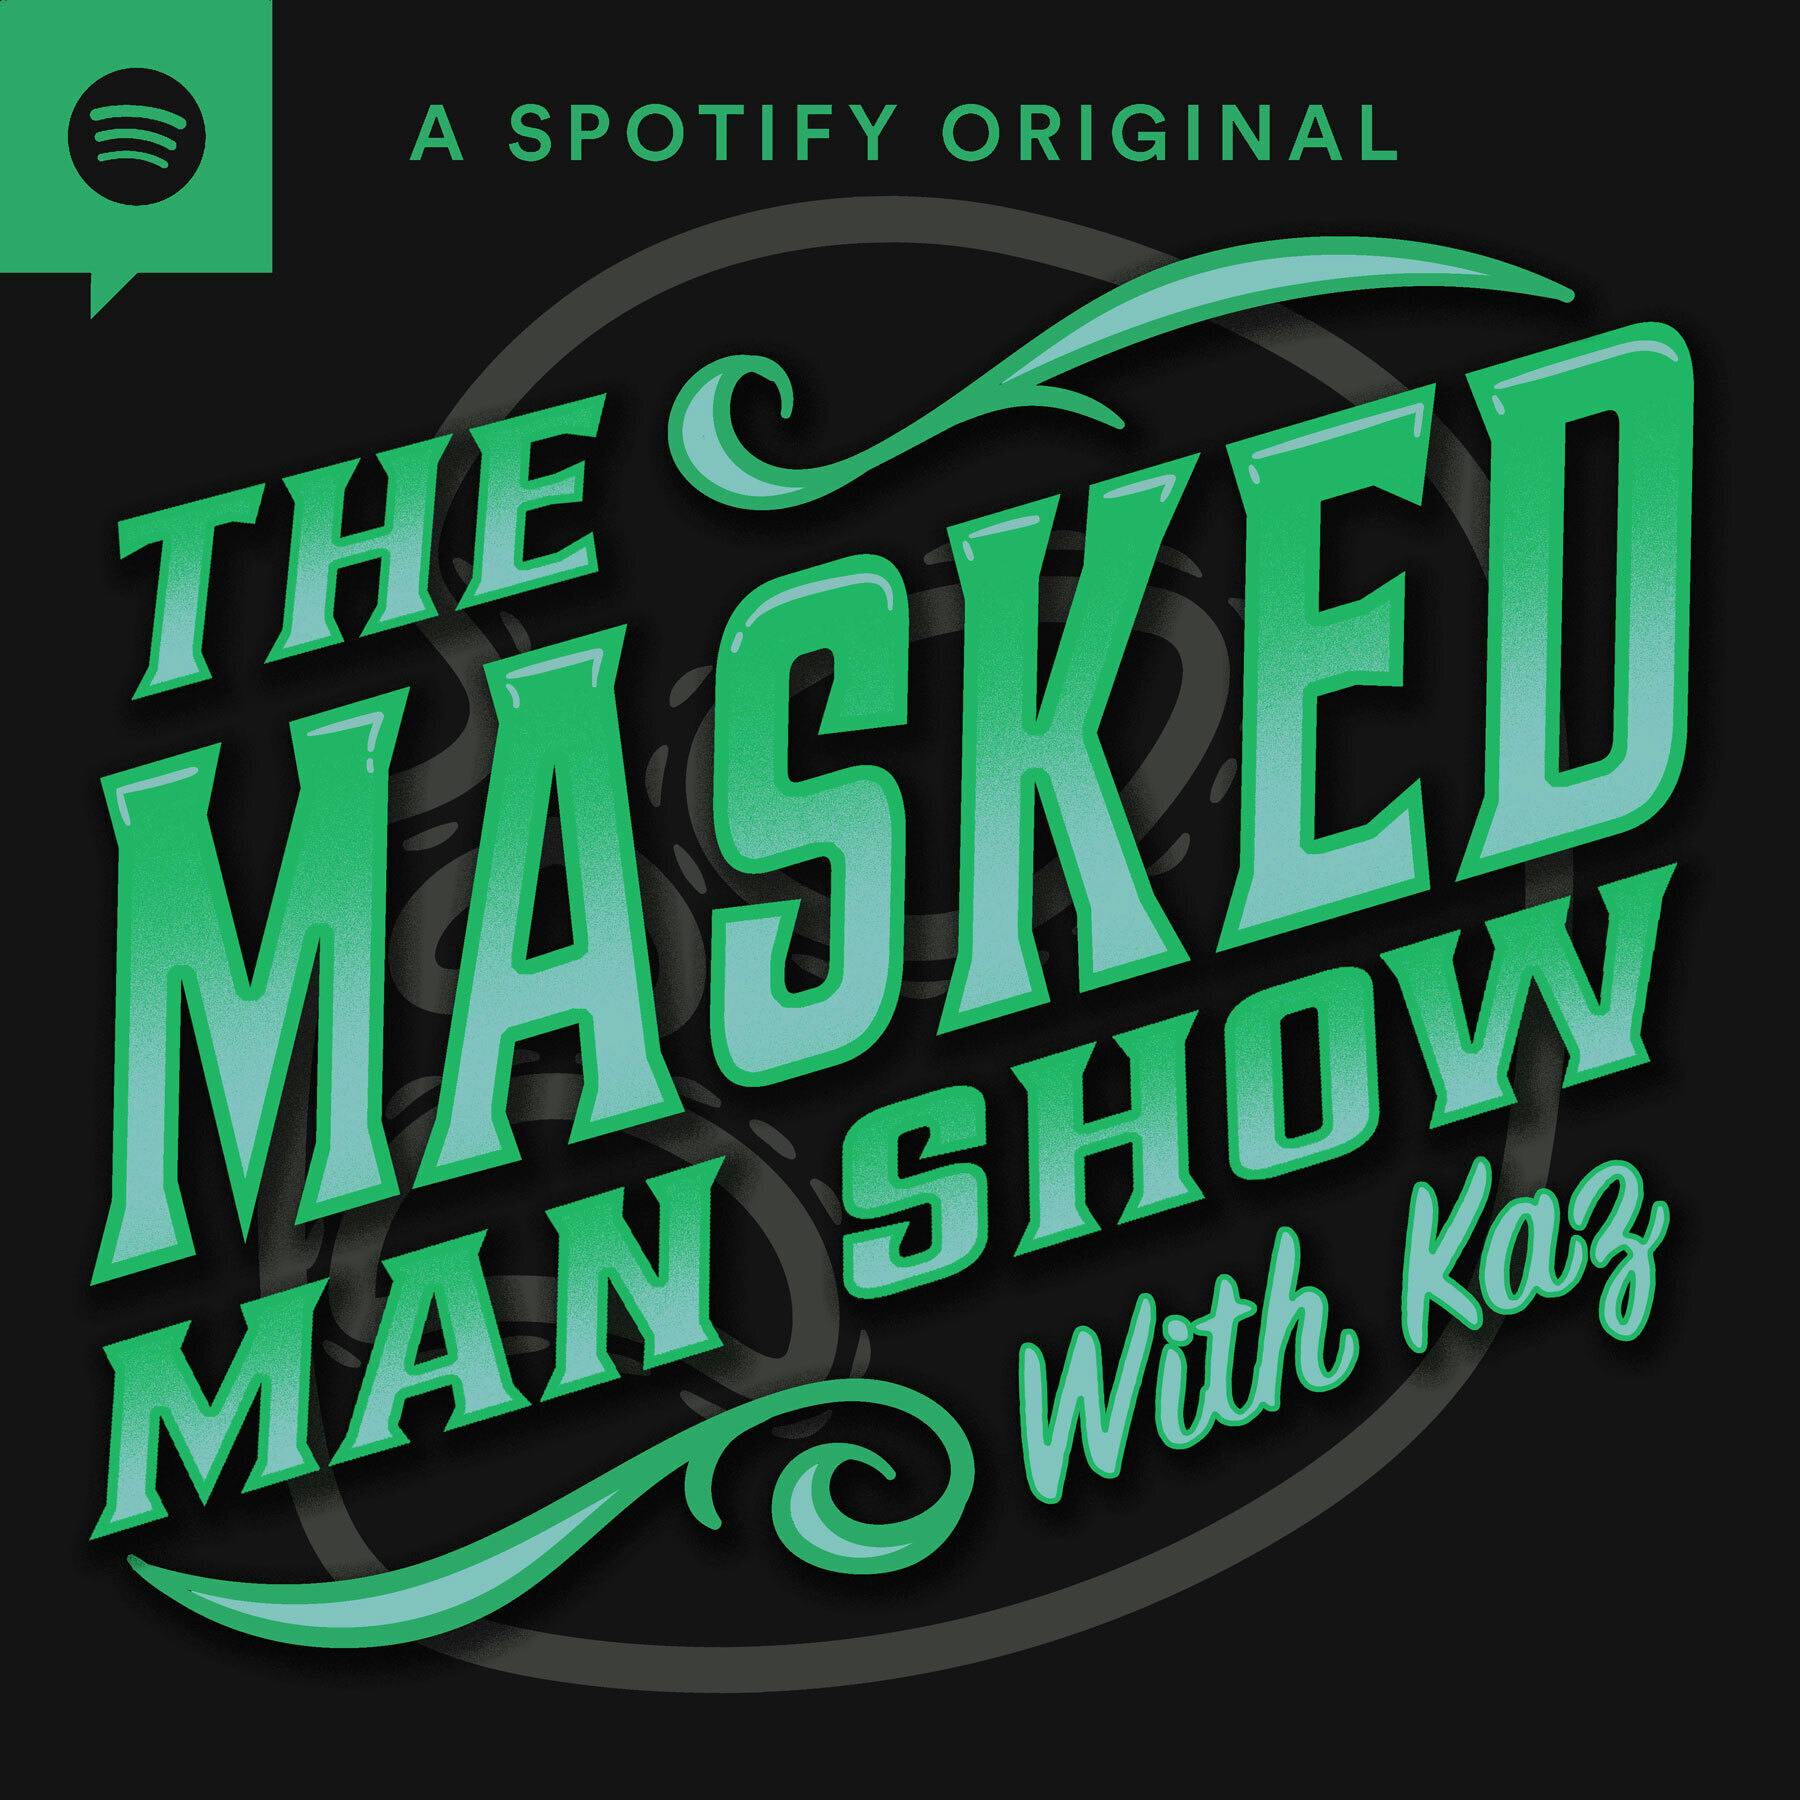 Shawn Michaels Takes NXT to a New Level With a Sexyy Red and TNA Crossover | The Masked Man Show